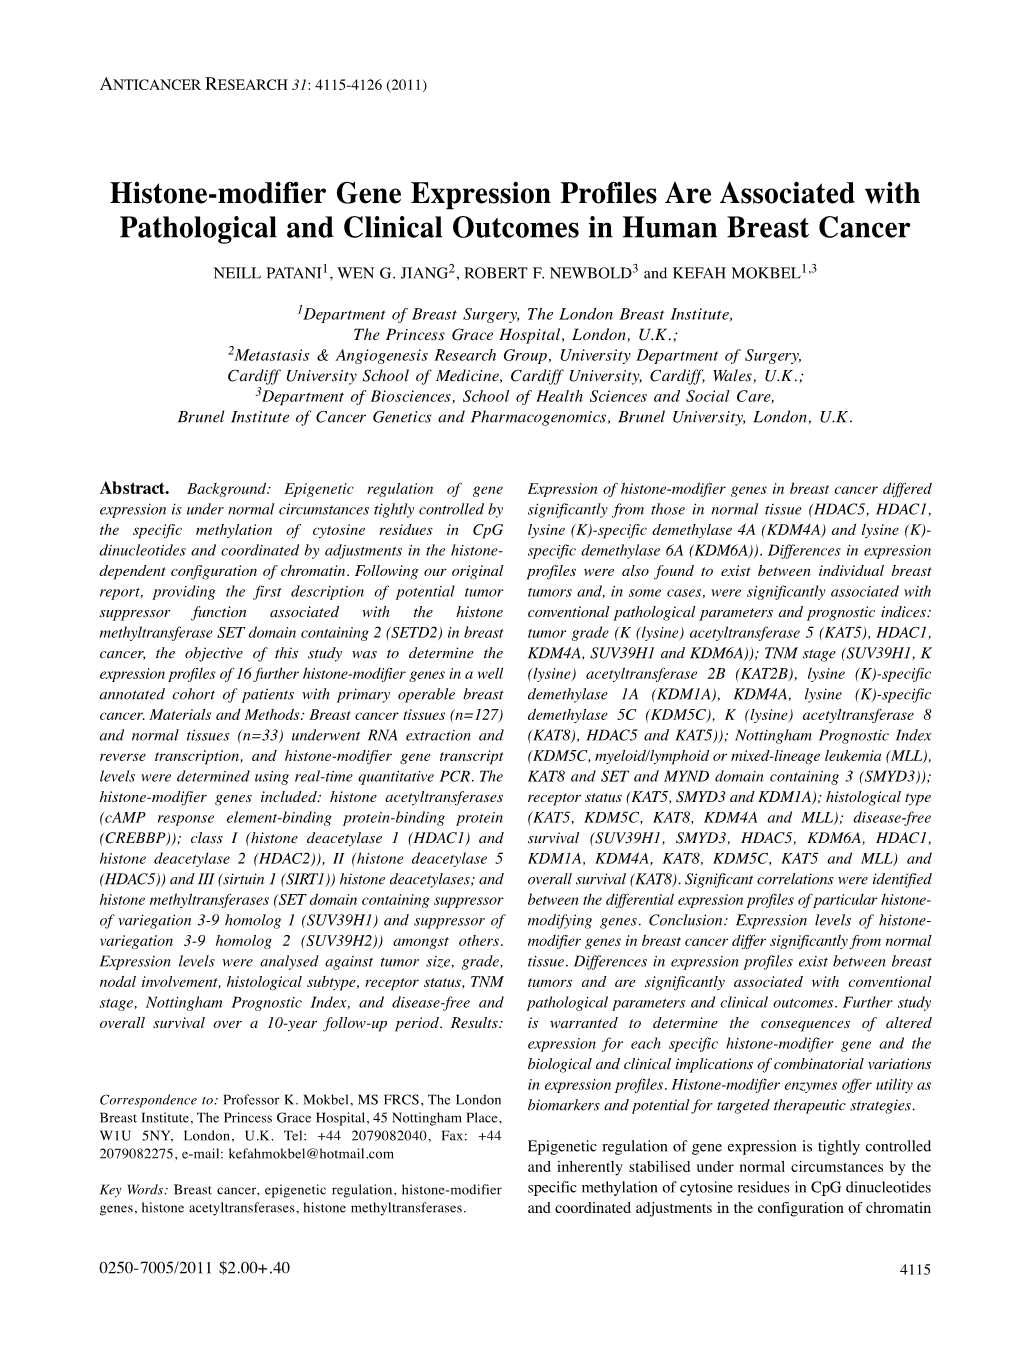 Histone-Modifier Gene Expression Profiles Are Associated with Pathological and Clinical Outcomes in Human Breast Cancer NEILL PATANI 1, WEN G